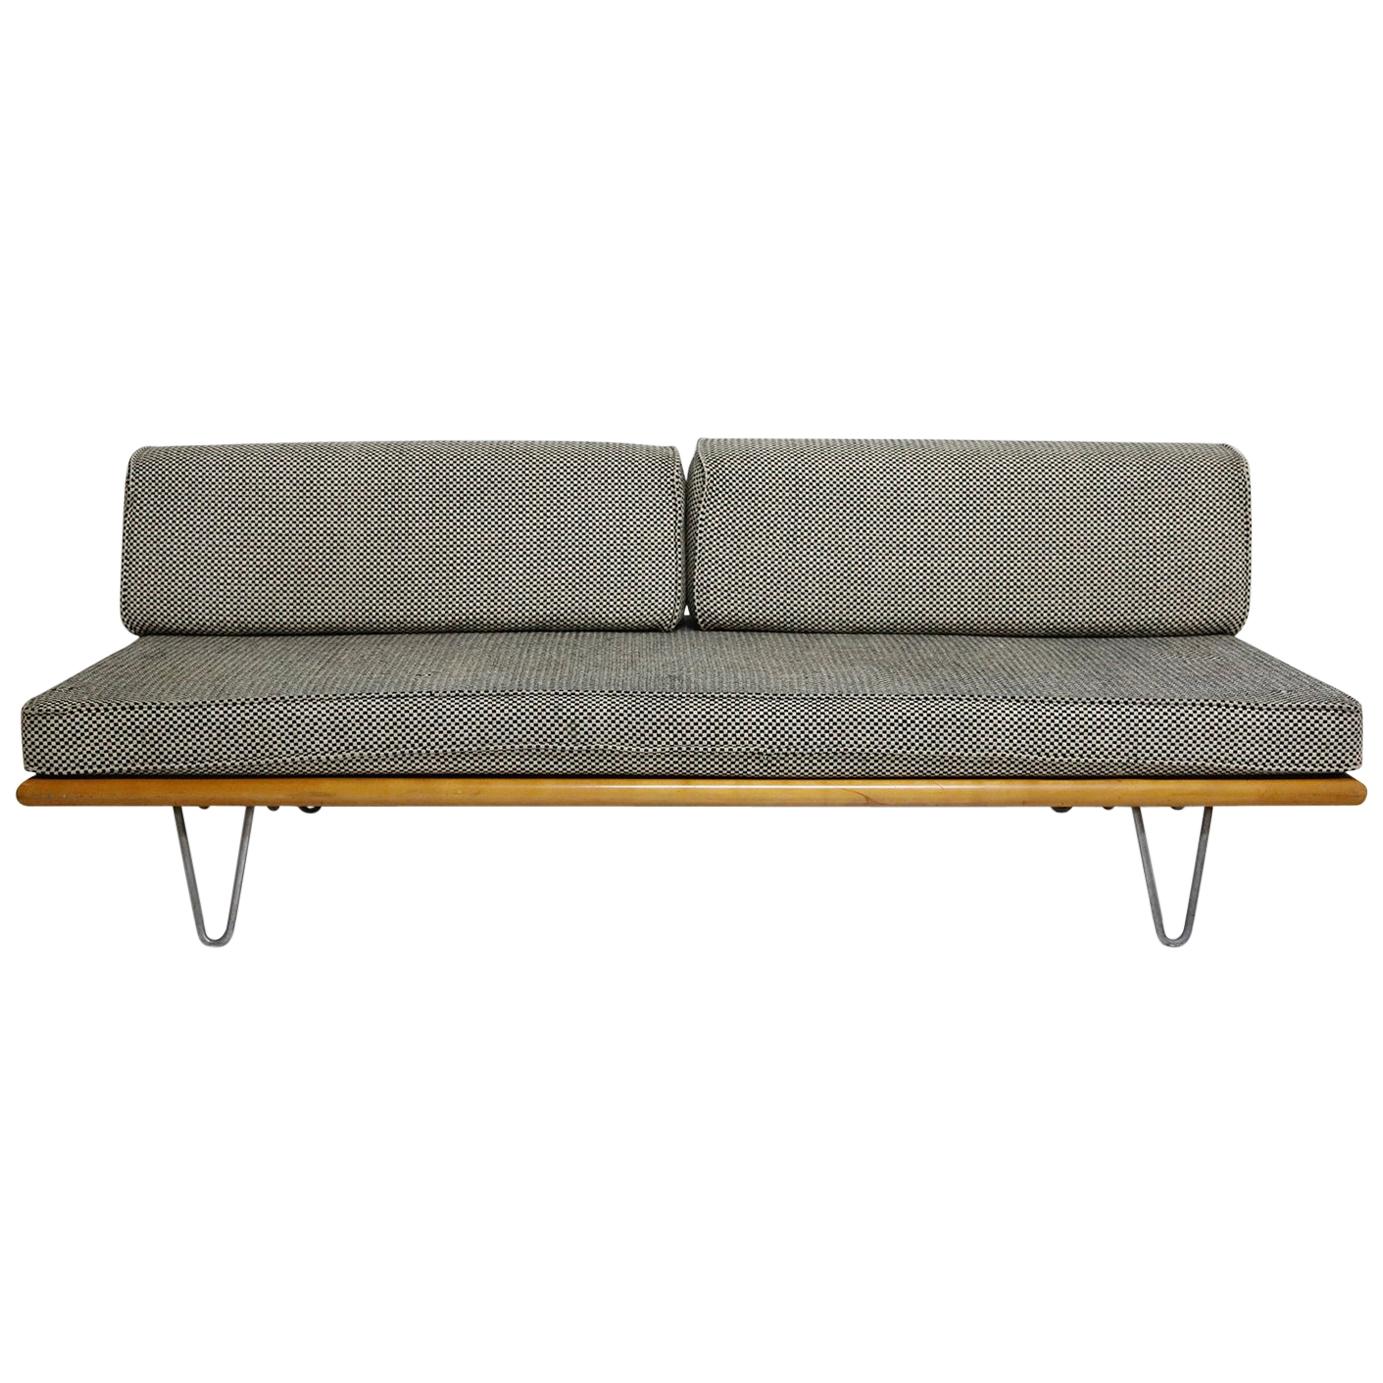 Convertible Daybed Sofa with Hairpin Legs by George Nelson for Herman Miller